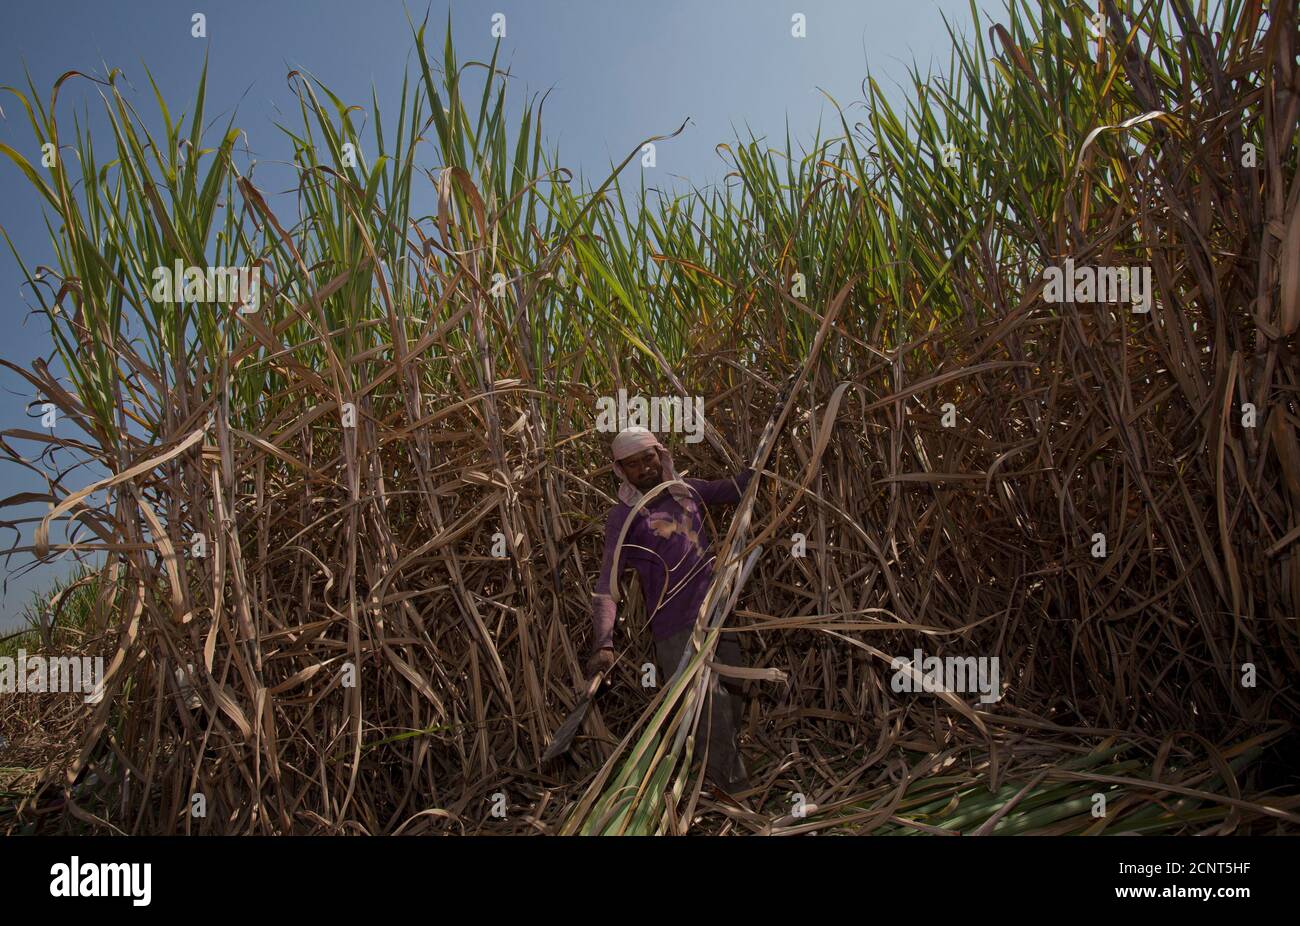 A manual labourer cuts stalks of sugarcane before they are taken to a factory near the village of Umraj, about 285km (177 miles) south of Mumbai, December 5, 2011. Farmers are buying new tools and machines as they try to cope with a labour shortage triggered by government policies aimed at promoting non-agricultural work. To match Insight INDIA-FARM/MECHANISATION REUTERS/Vivek Prakash (INDIA - Tags: BUSINESS AGRICULTURE) Stock Photo